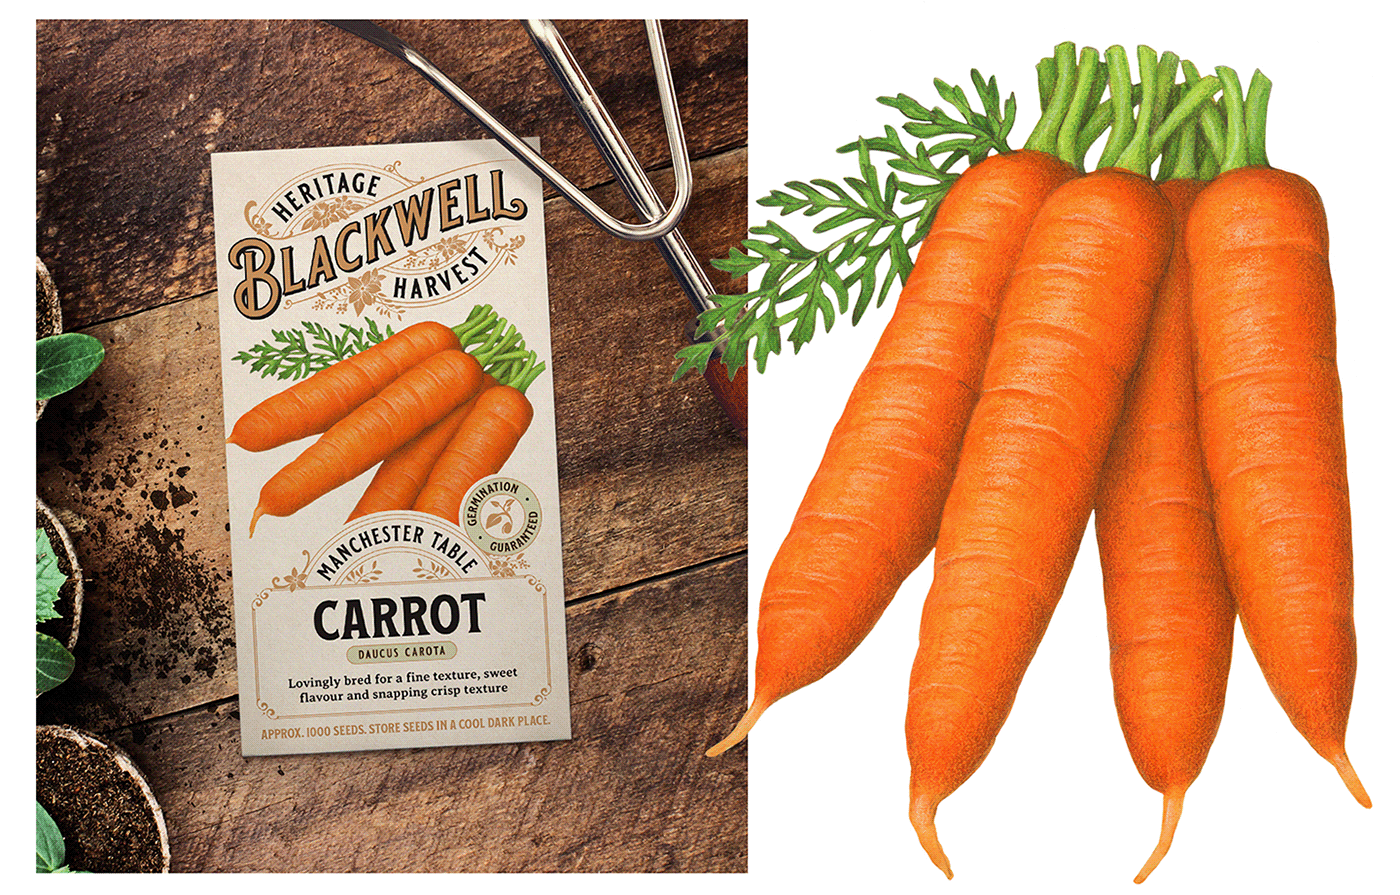 Realistic illustration of a bunch of carrots used for packaging.